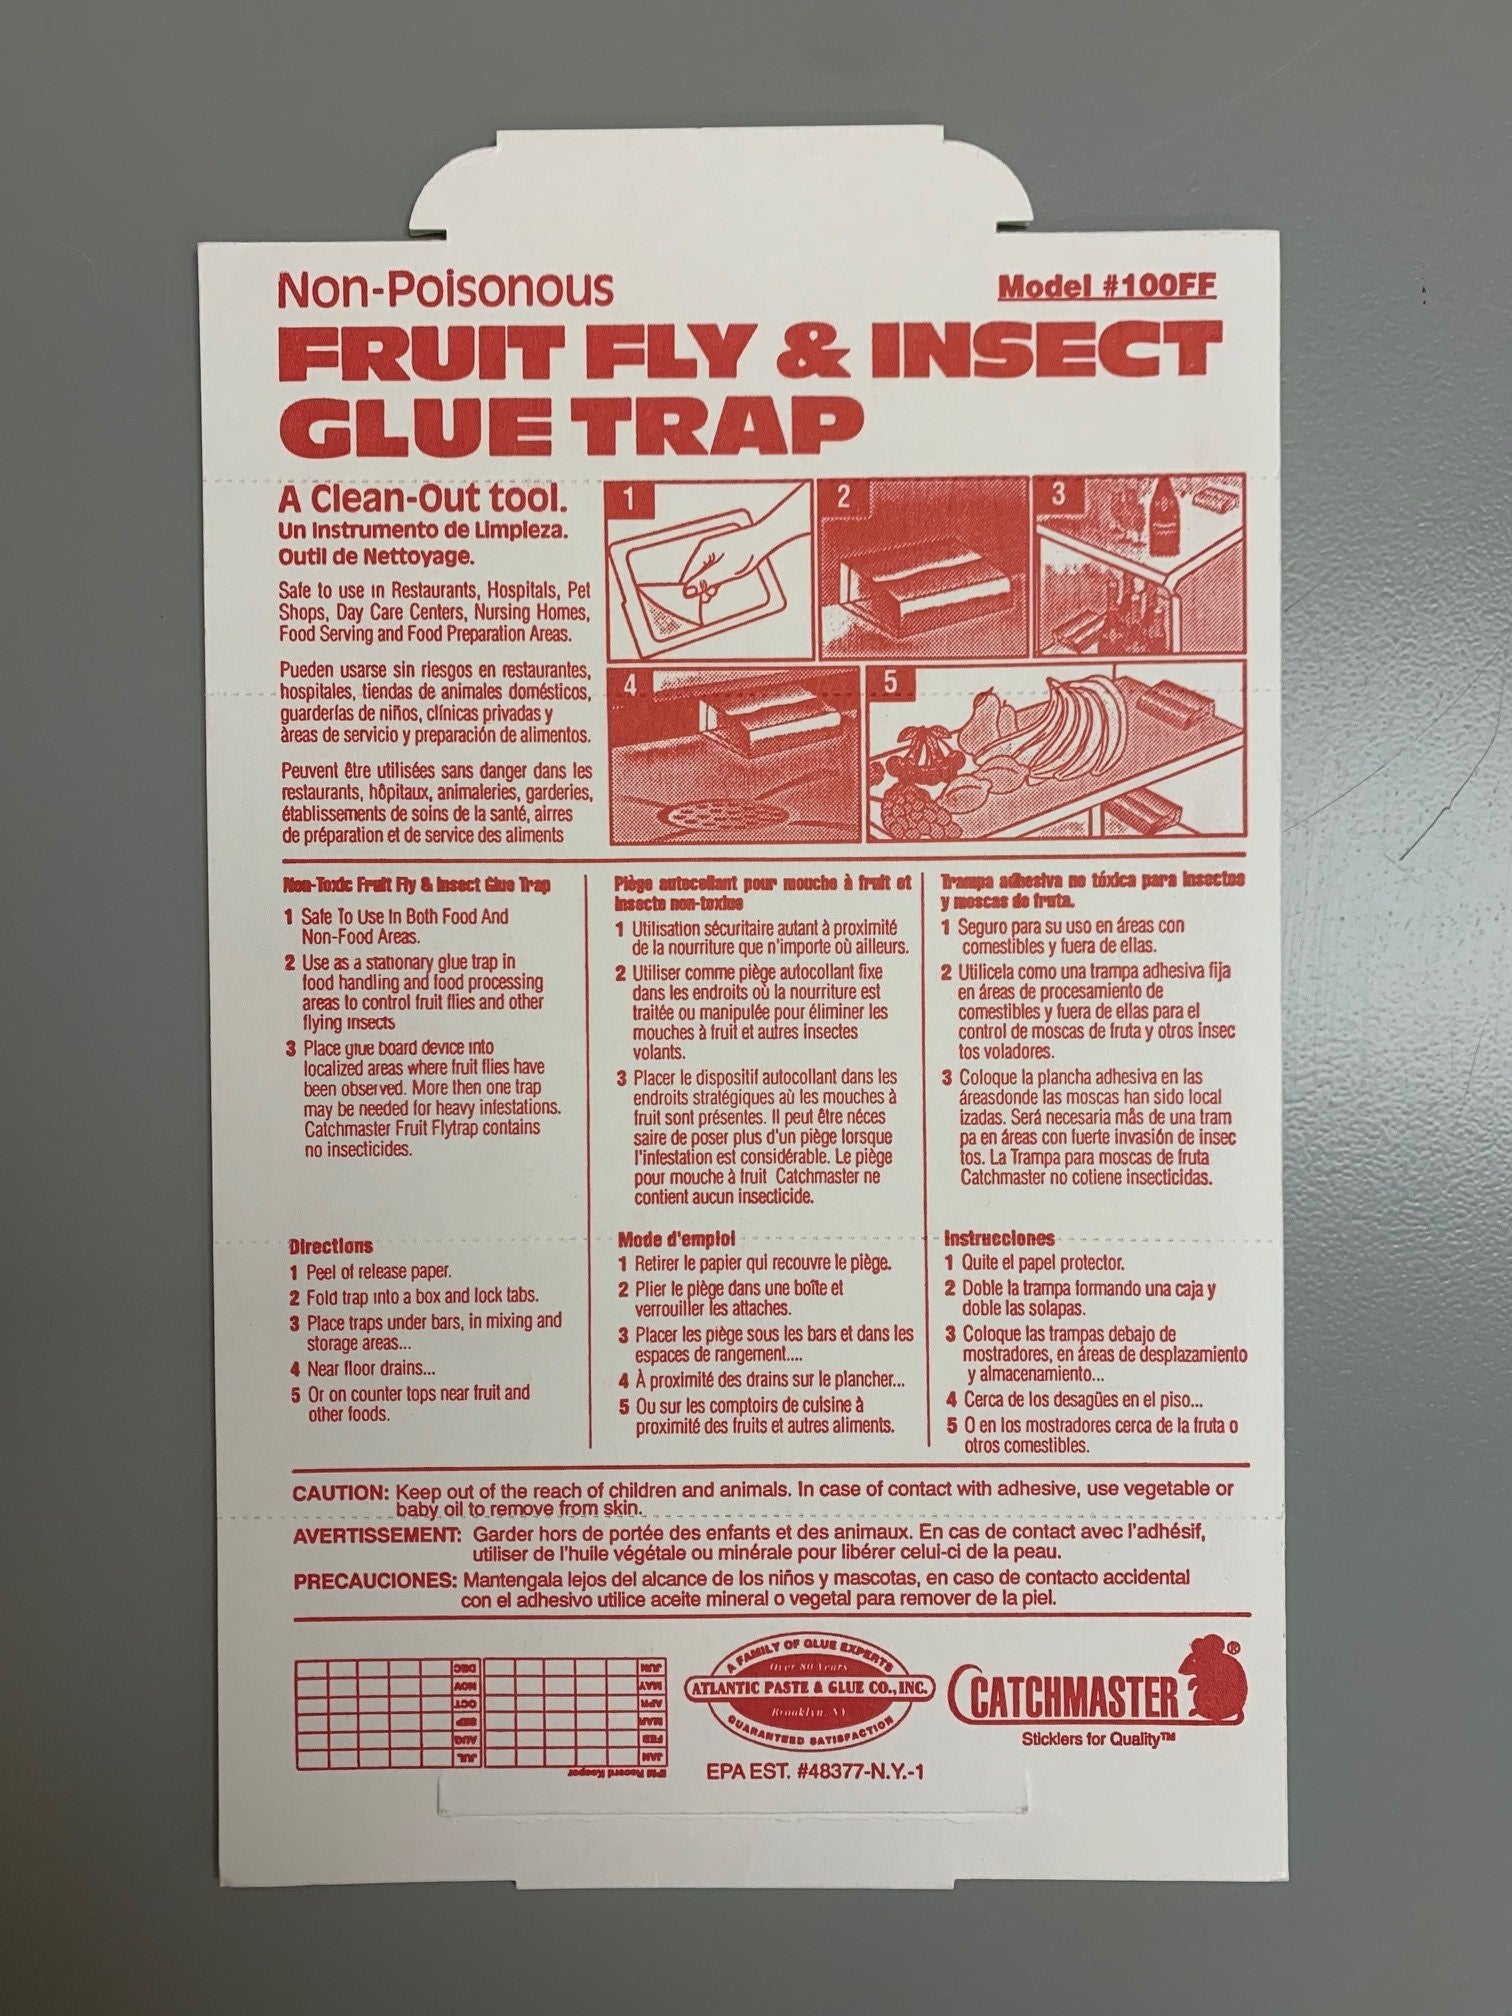 Catchmaster Fruit Fly & Insect Glue Trap